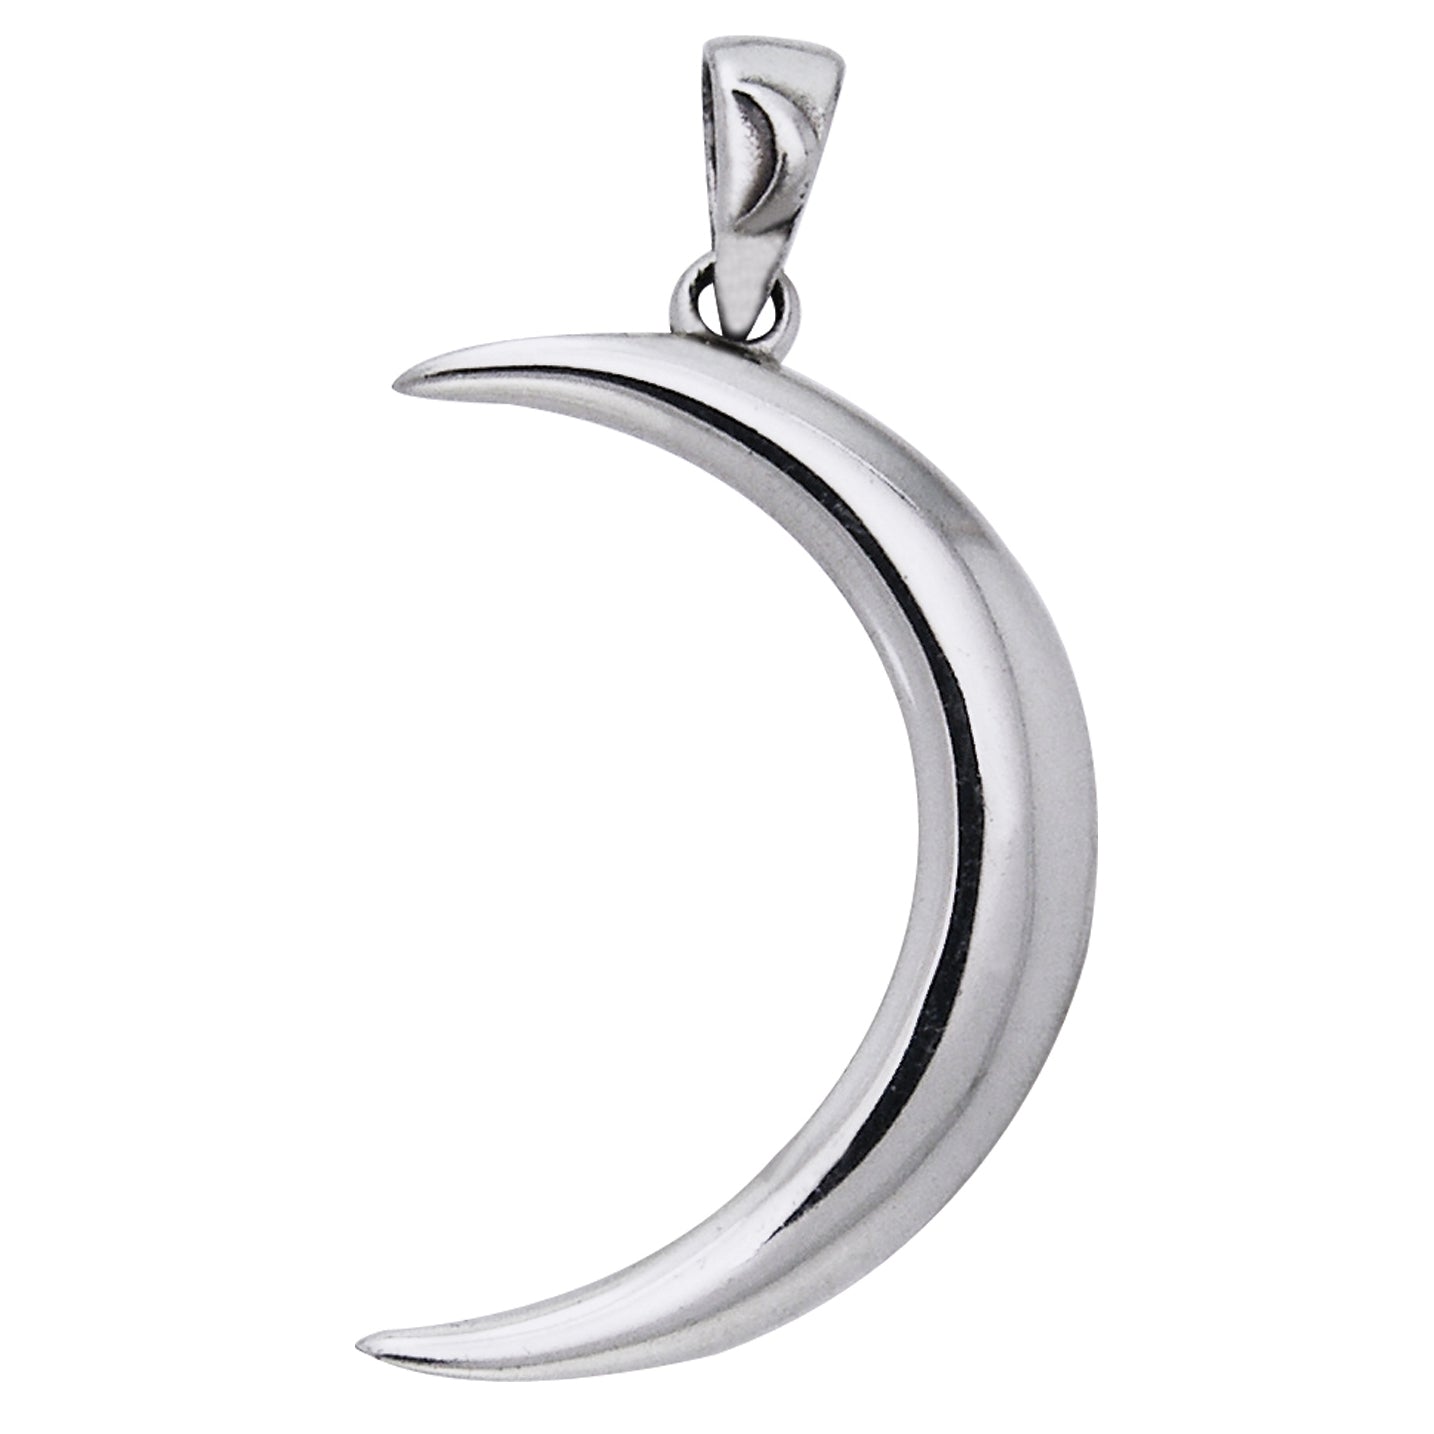 Large Crescent Moon - Lunar Magic Sterling Silver Pendant - Silver Insanity